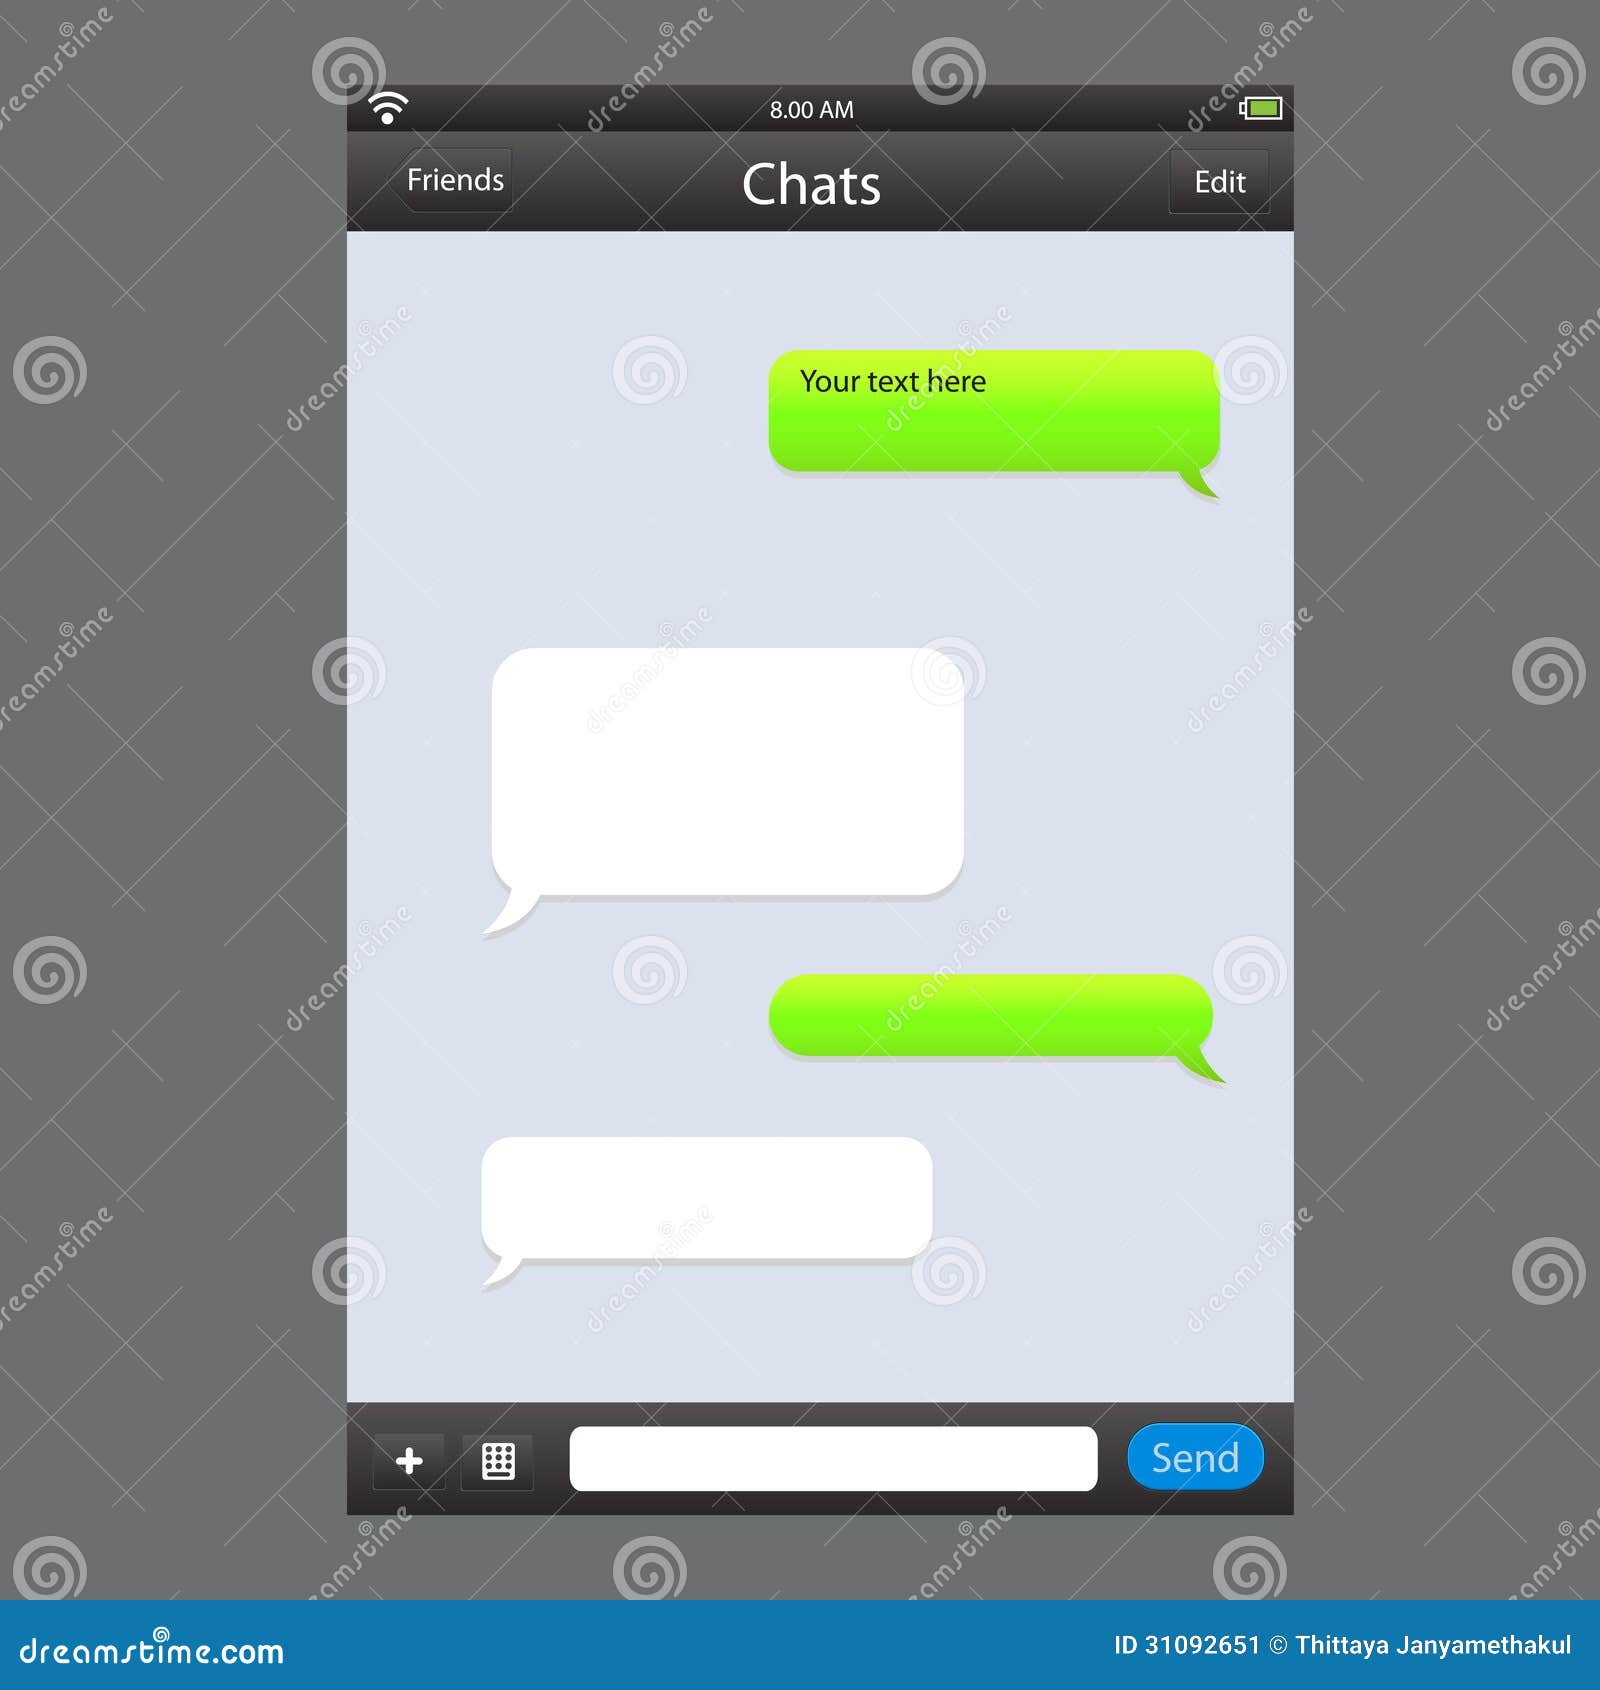 chat application template can place your own text message boxes 31092651